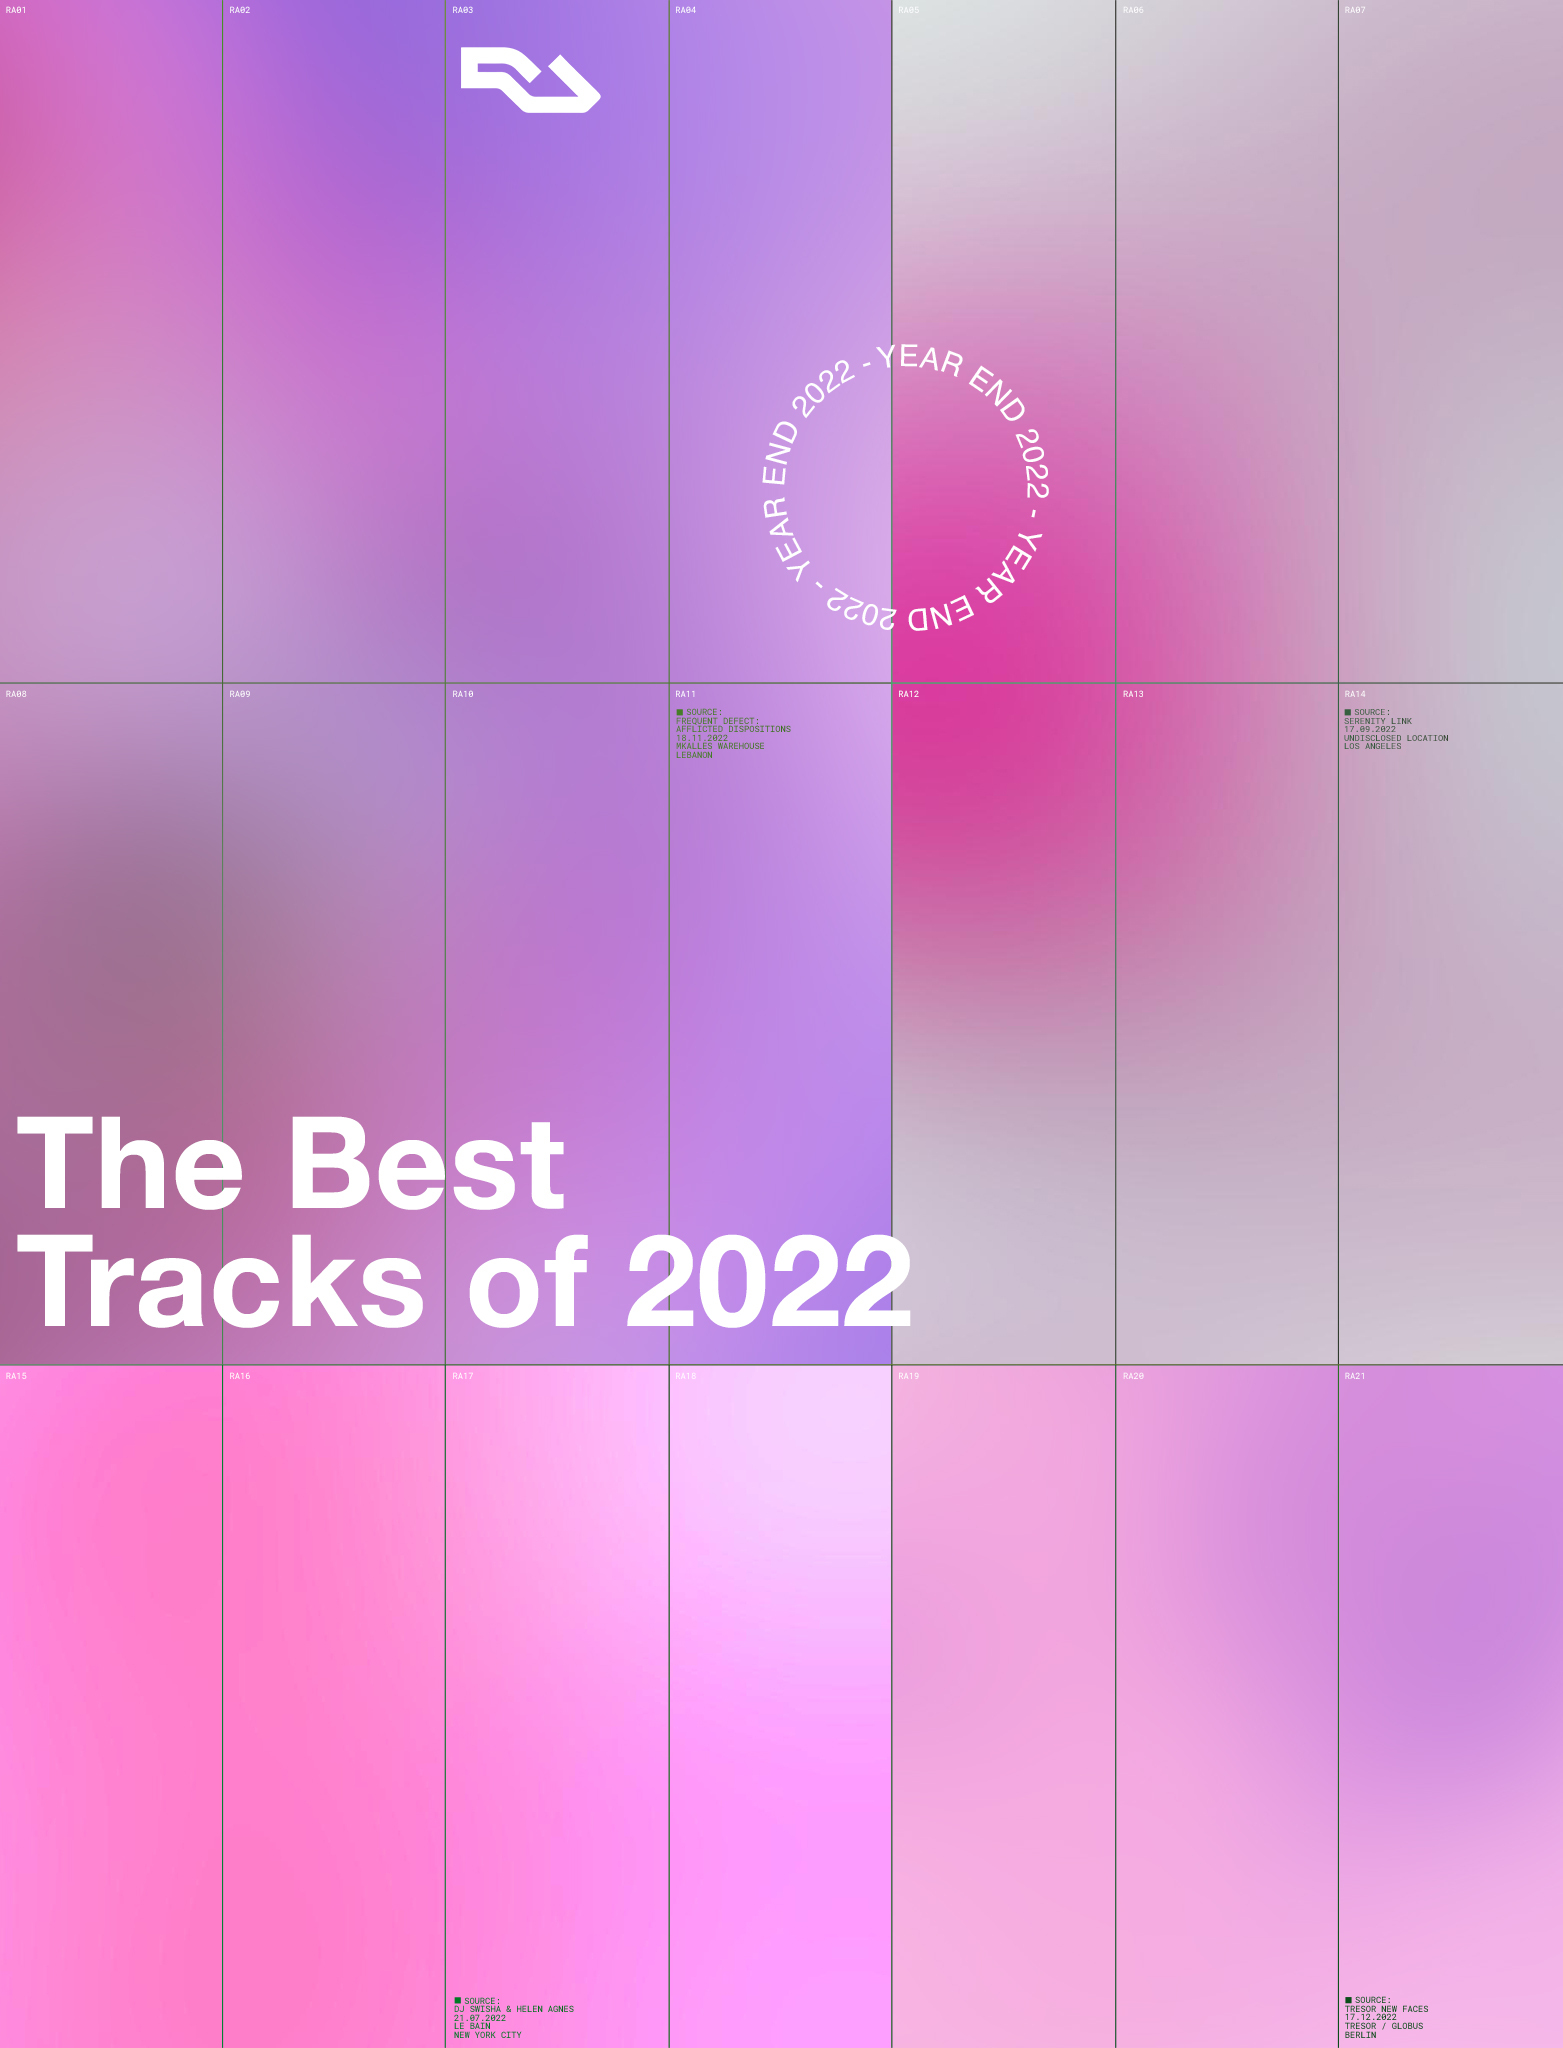 The Best Tracks of 2022